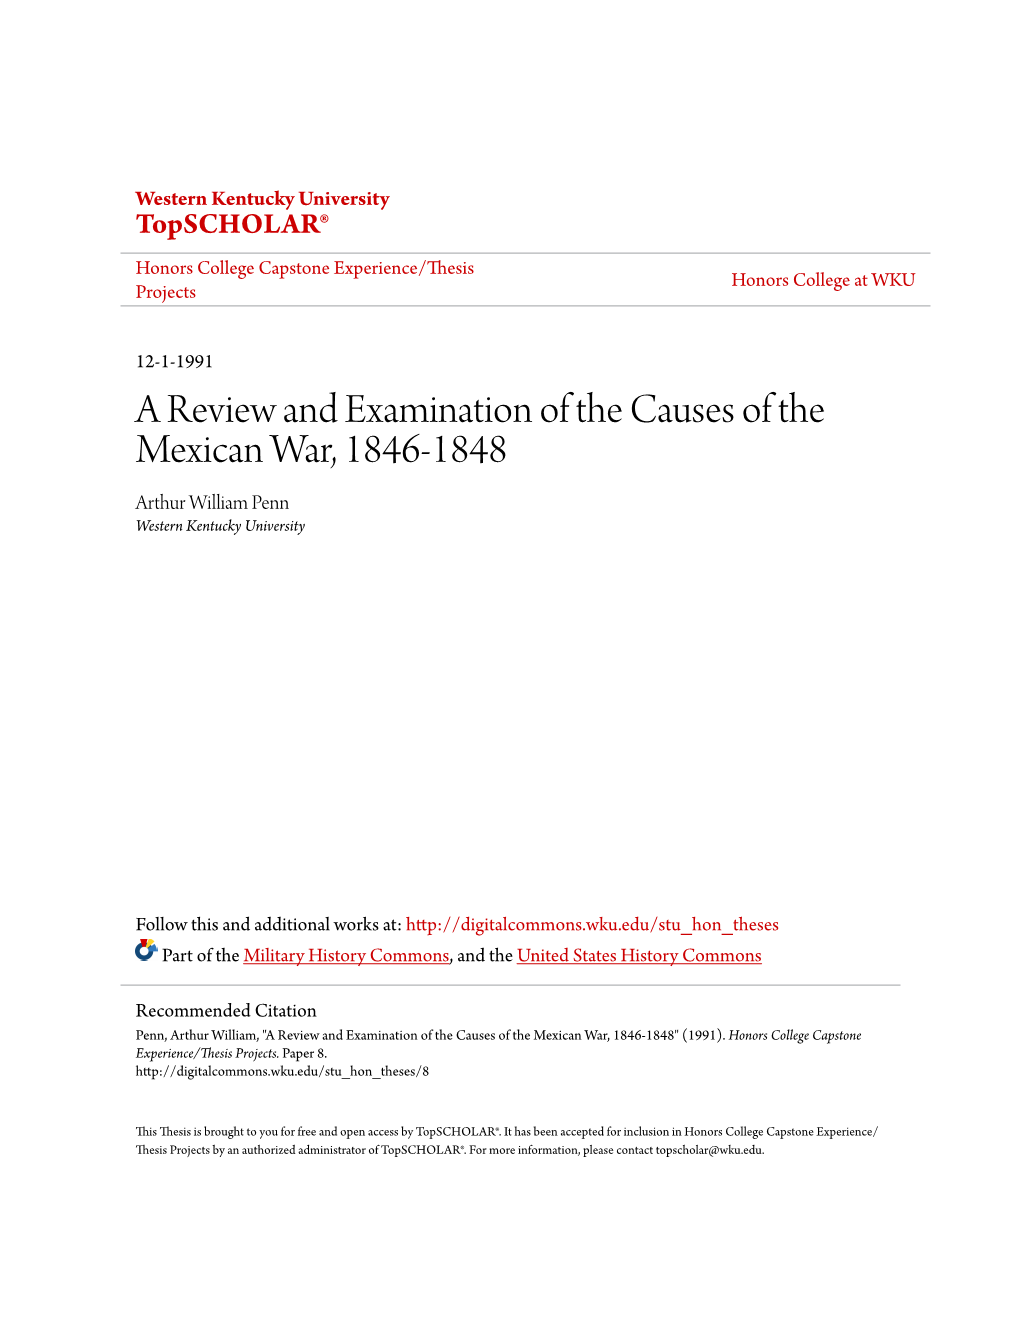 A Review and Examination of the Causes of the Mexican War, 1846-1848 Arthur William Penn Western Kentucky University